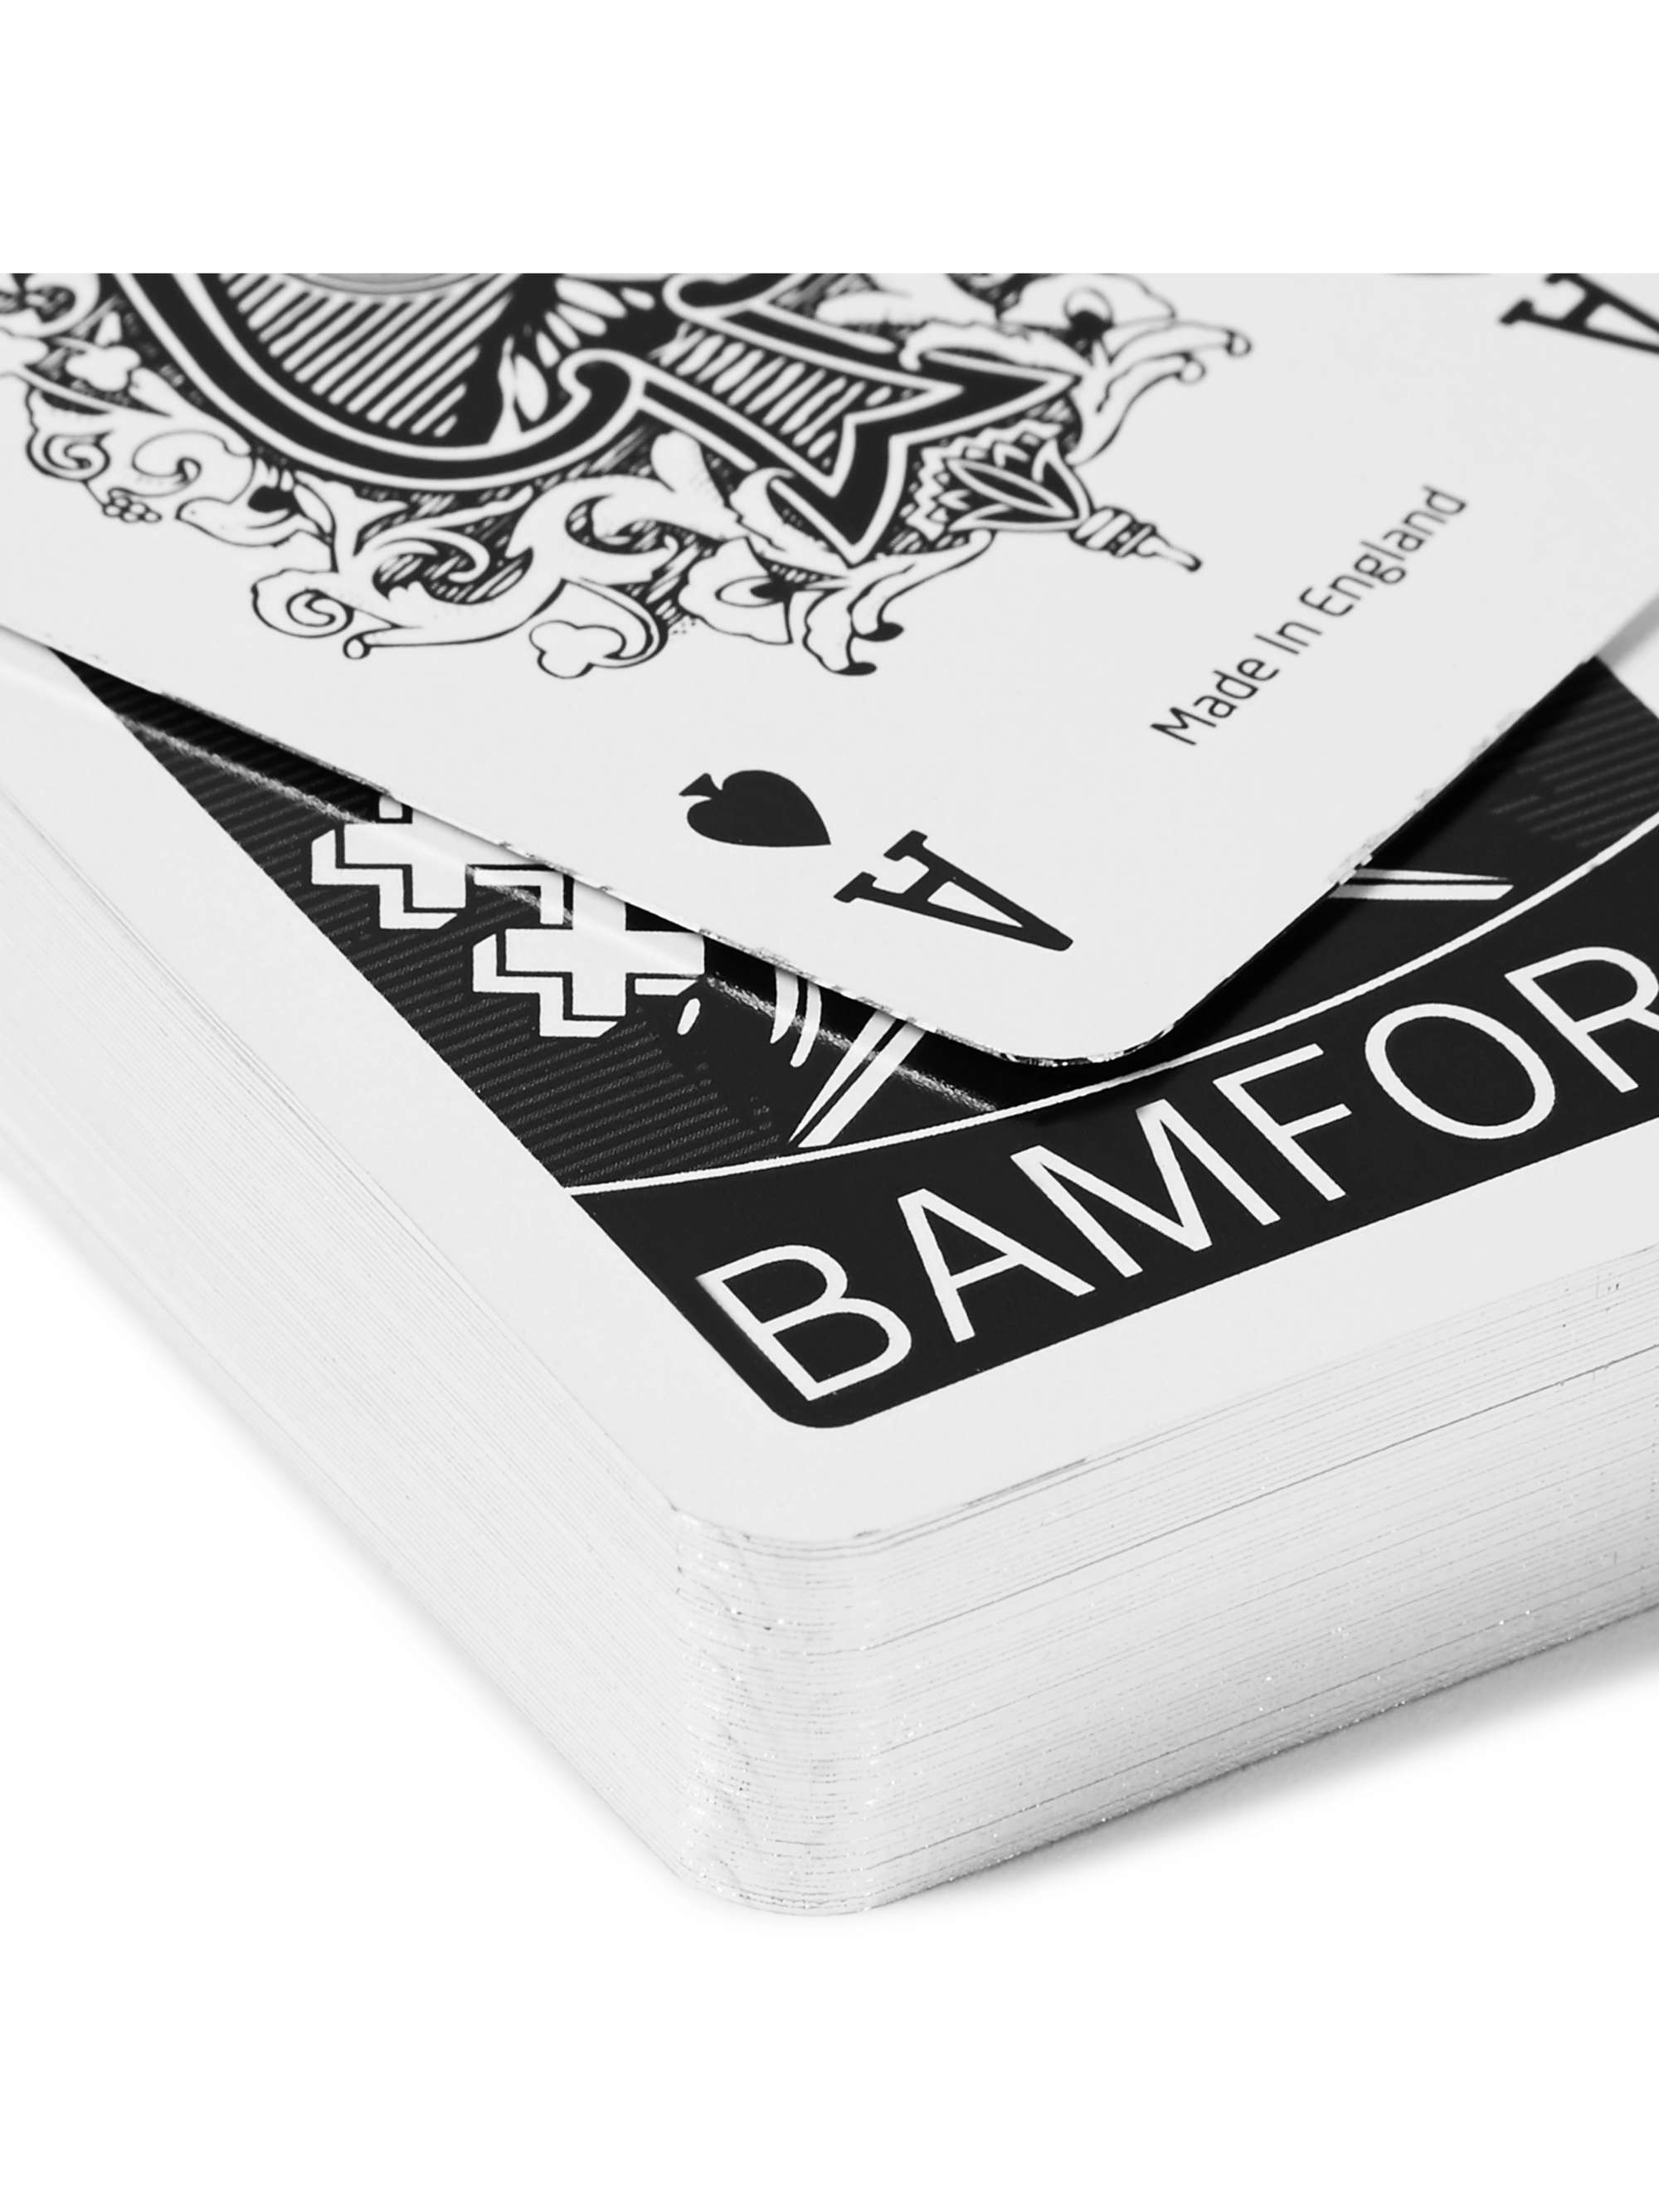 BAMFORD LONDON Two-Pack Illustrated Playing Cards Decks